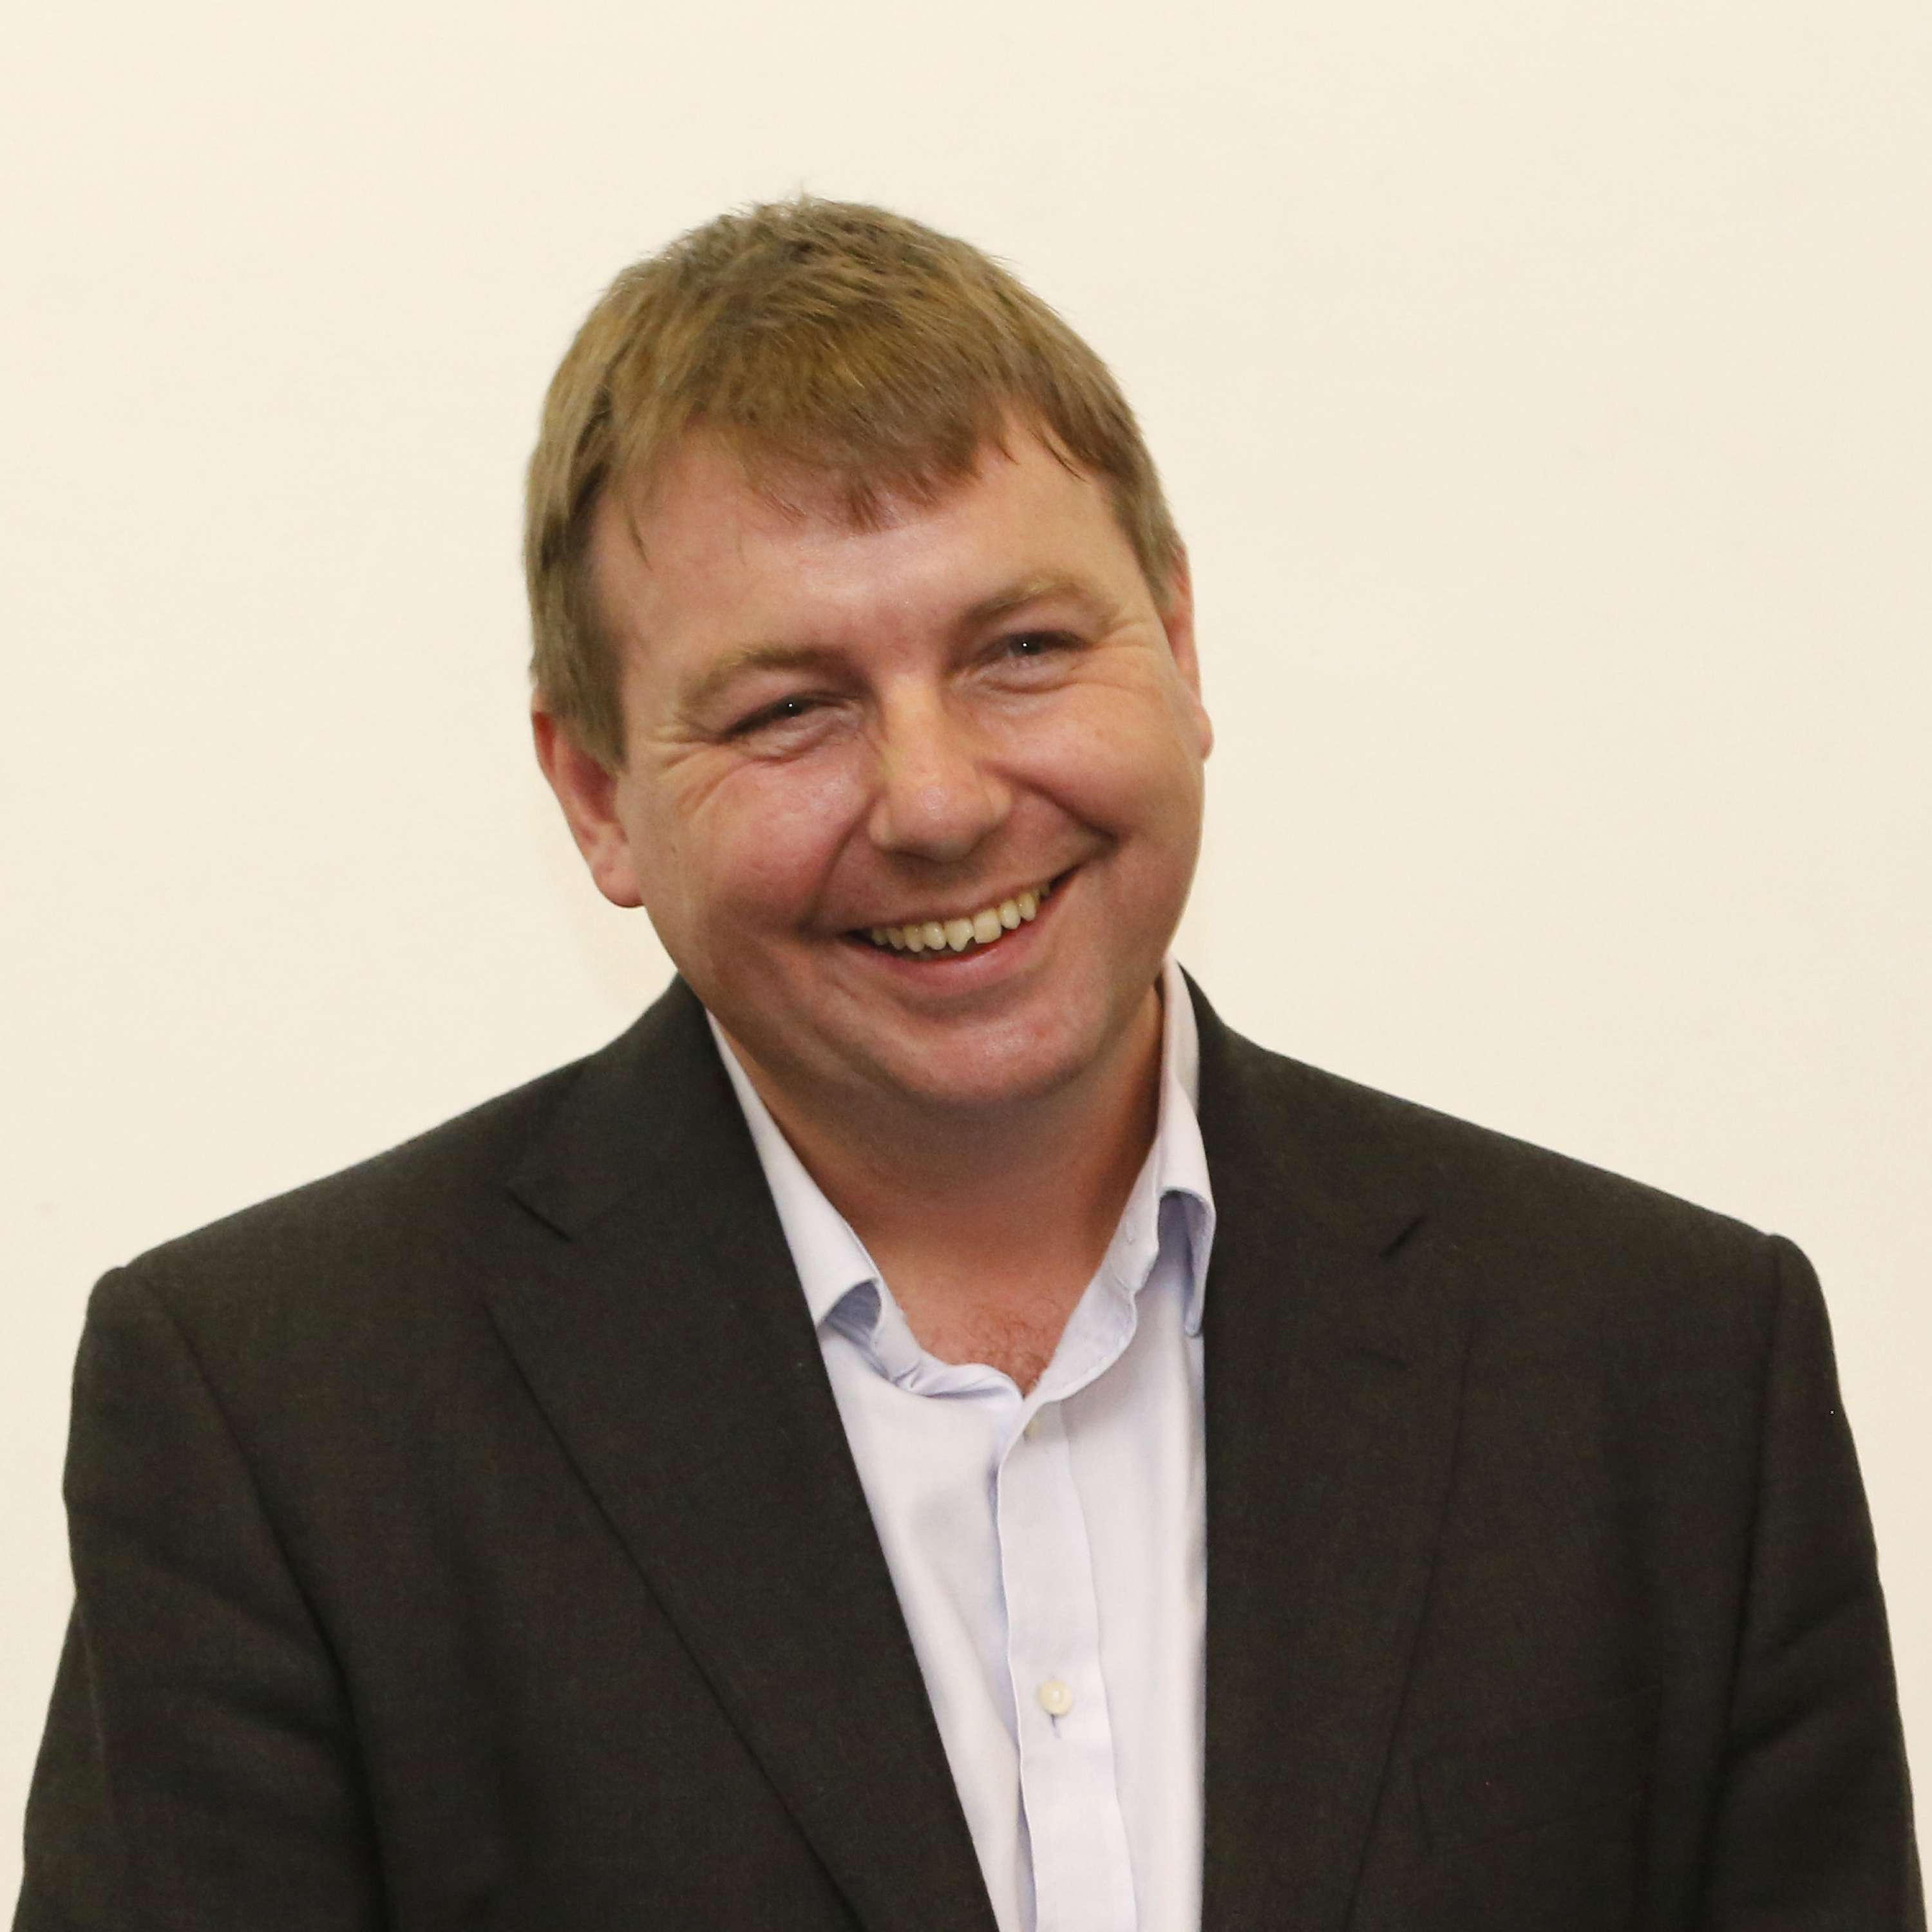 Episode 106: Interview with Danny Dorling, social geographer and Professor of Geography